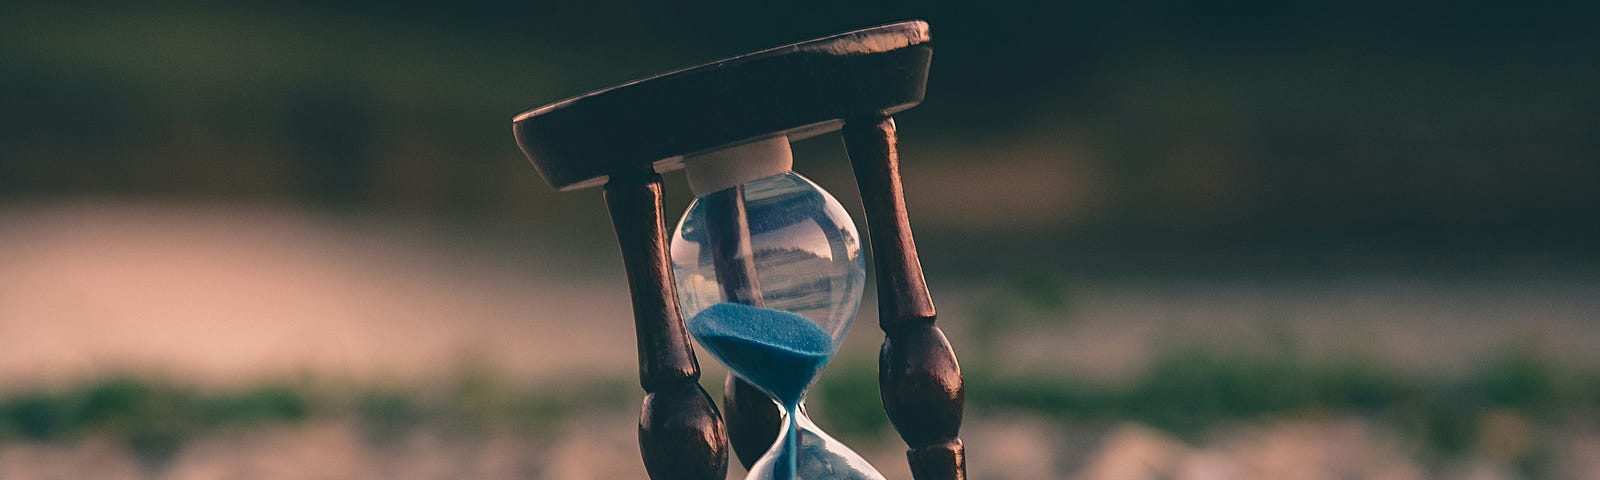 A tilted hourglass resting on pebbles